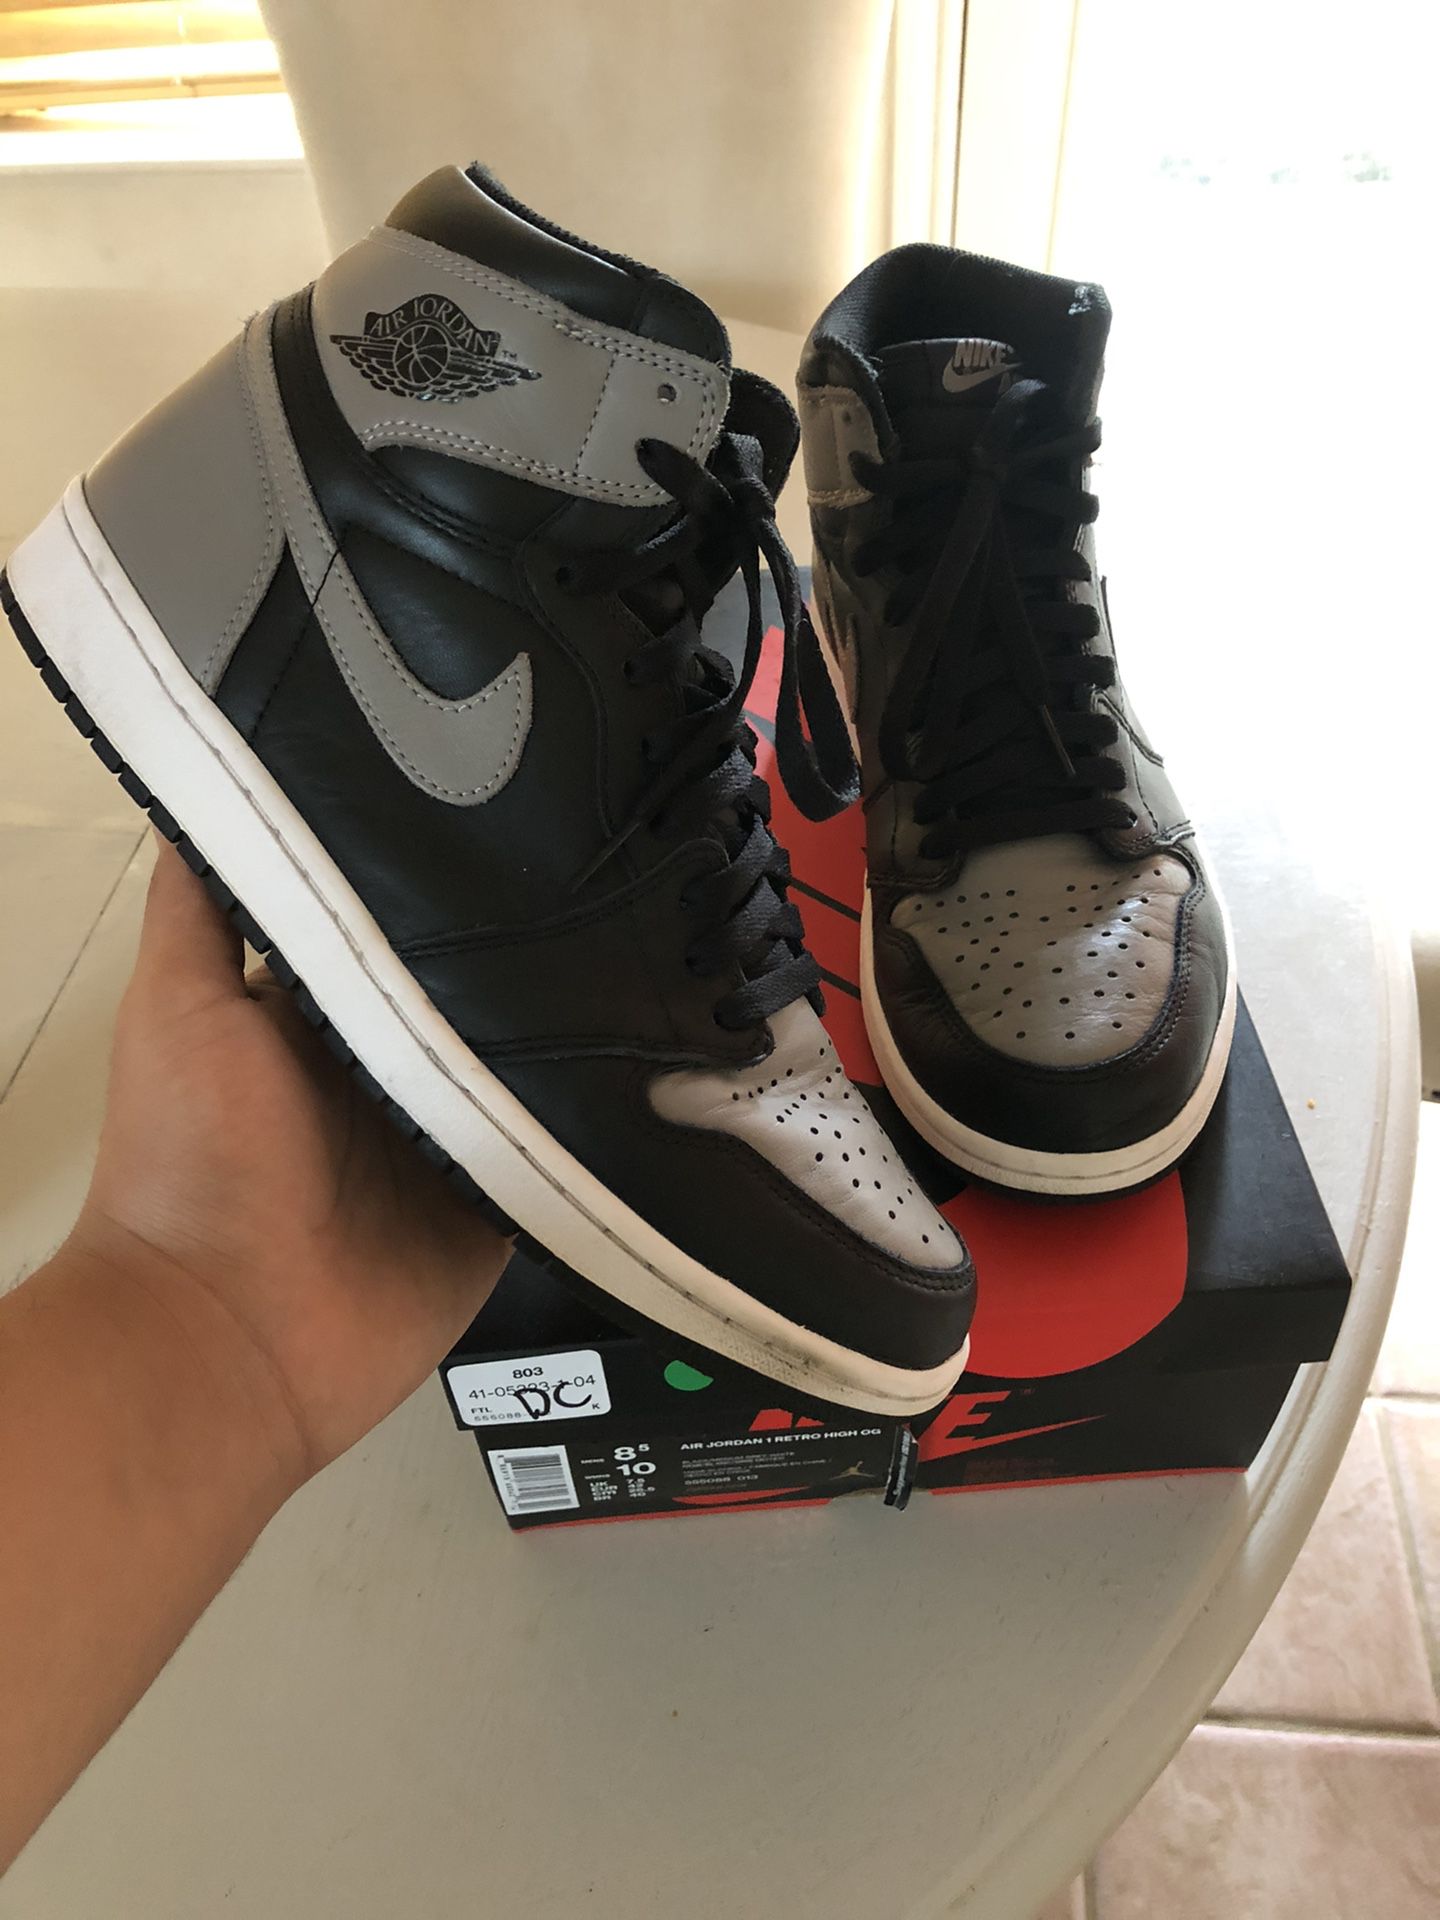 Jordan 1 Shadow size 8.5 used with box